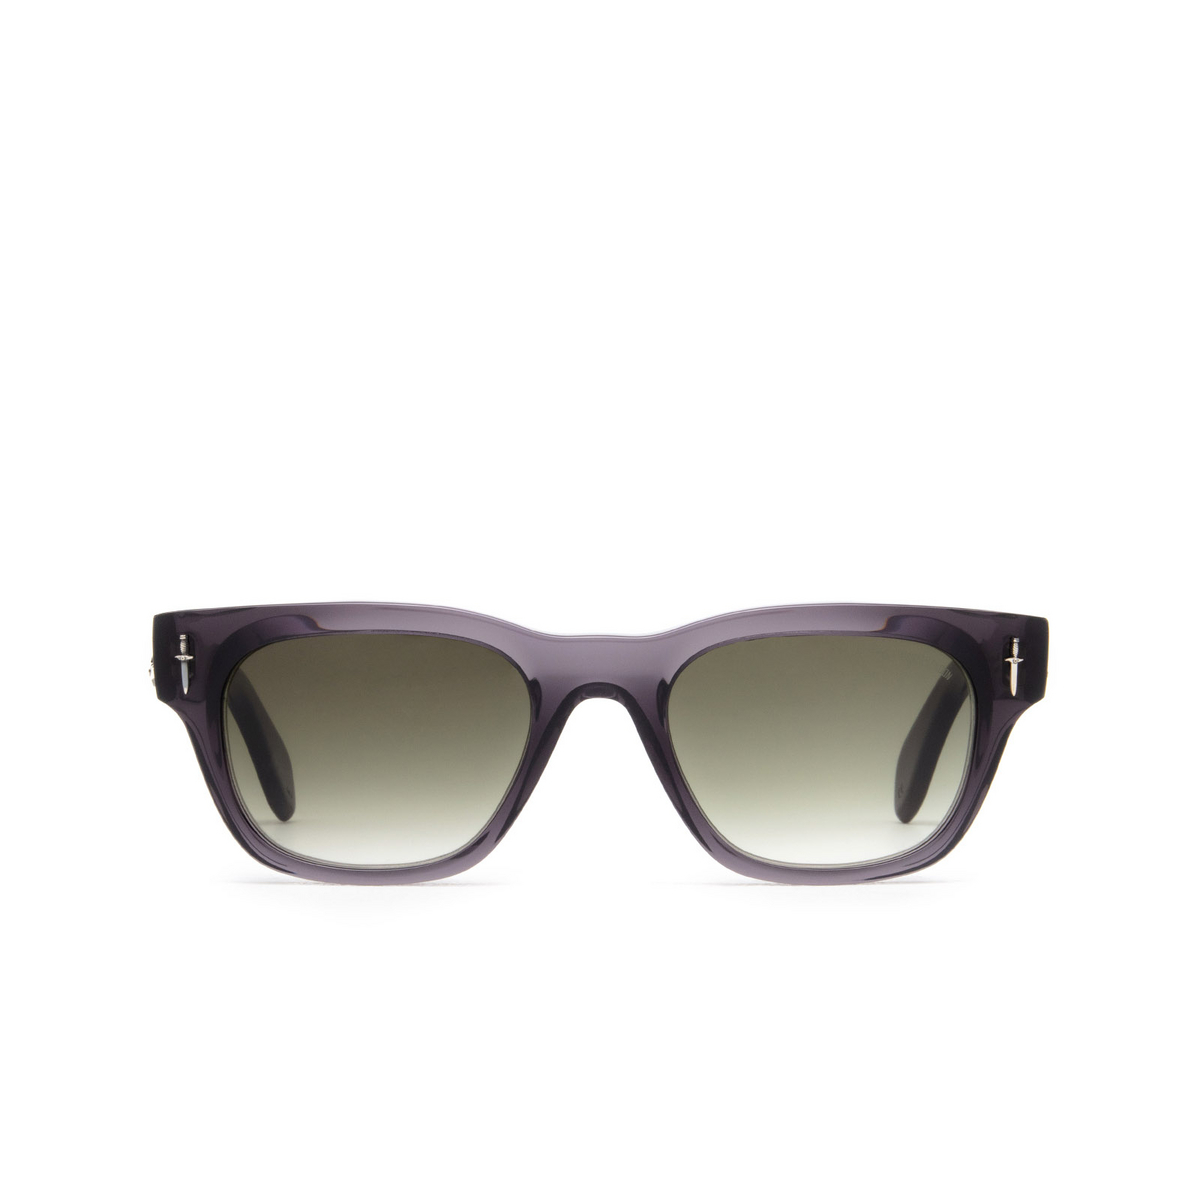 Cutler and Gross 003 Sunglasses 03 Dark Grey - front view